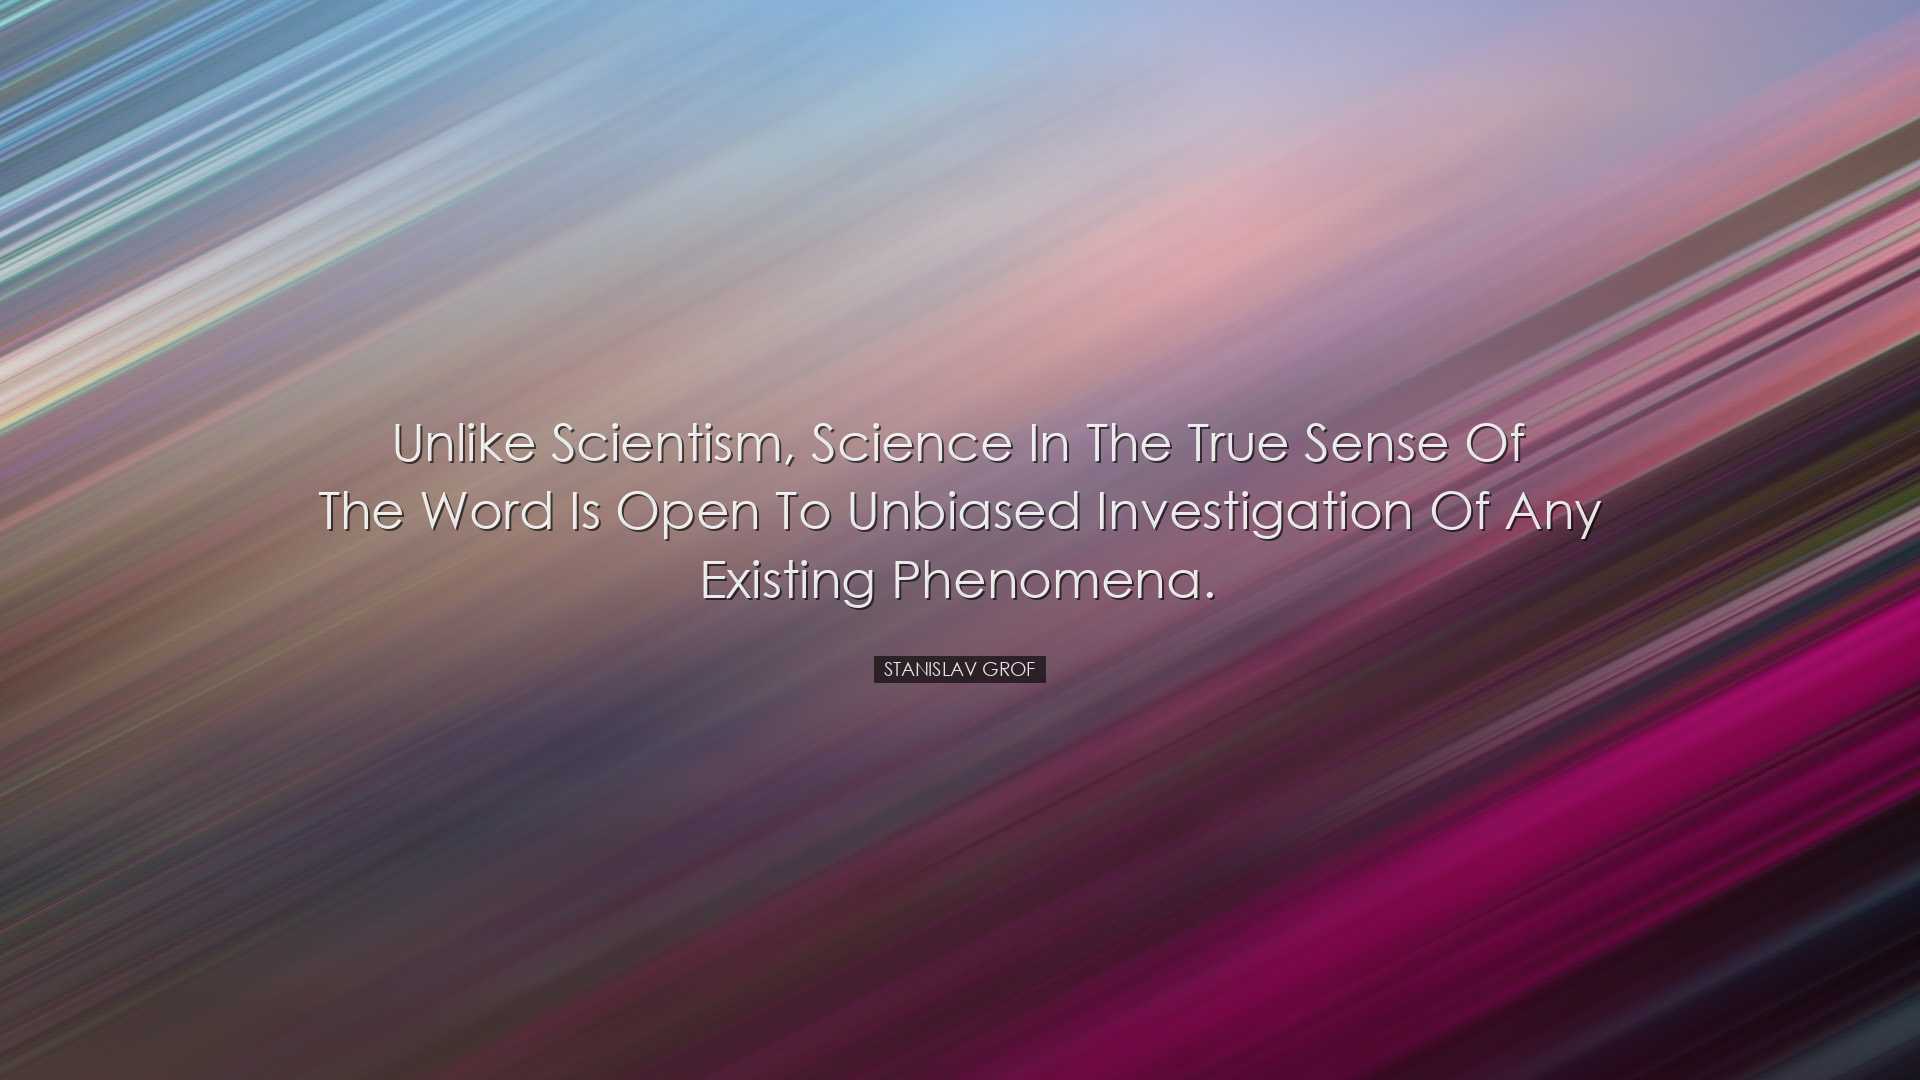 Unlike scientism, science in the true sense of the word is open to